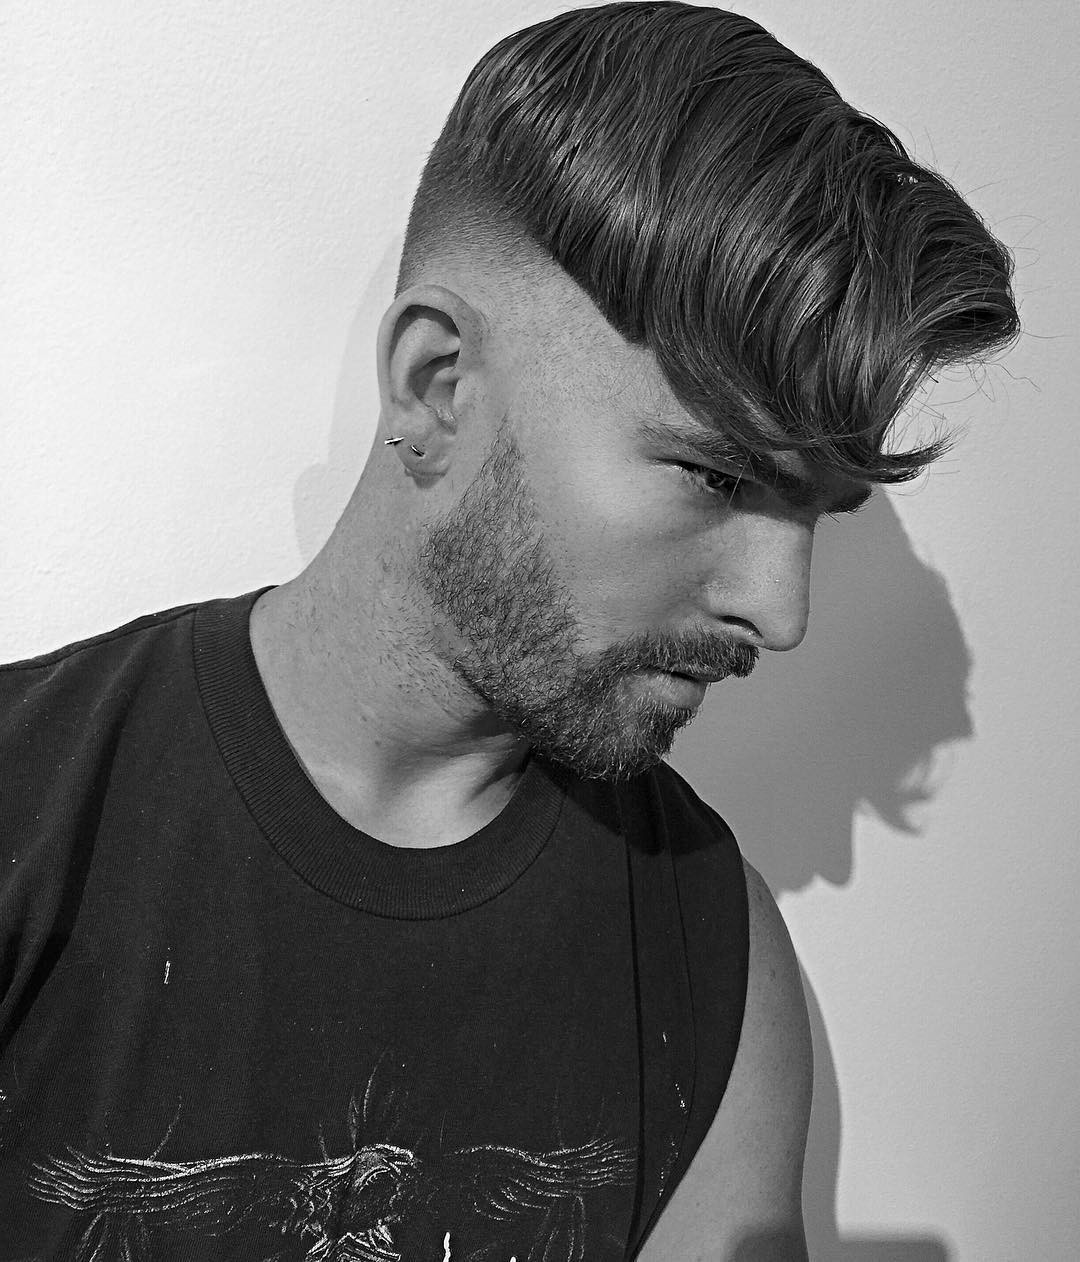 Hairstyles For Undercuts
 Top 21 Undercut Haircuts Hairstyles For Men 2020 Update